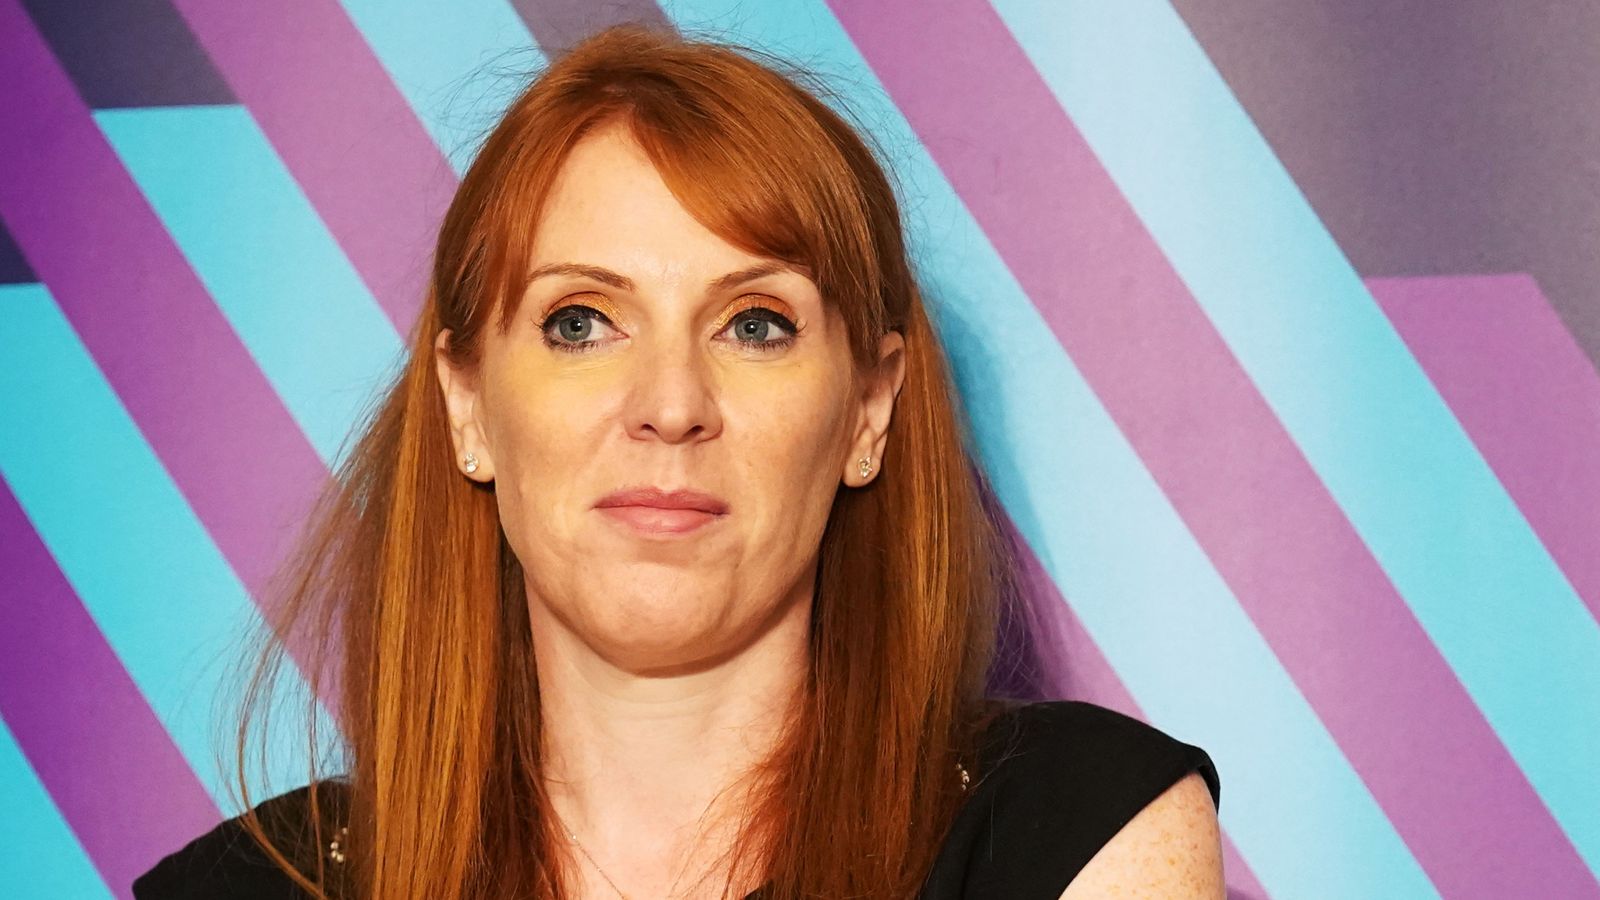 angela rayner says she will 'step down' if she is found to have committed a crime